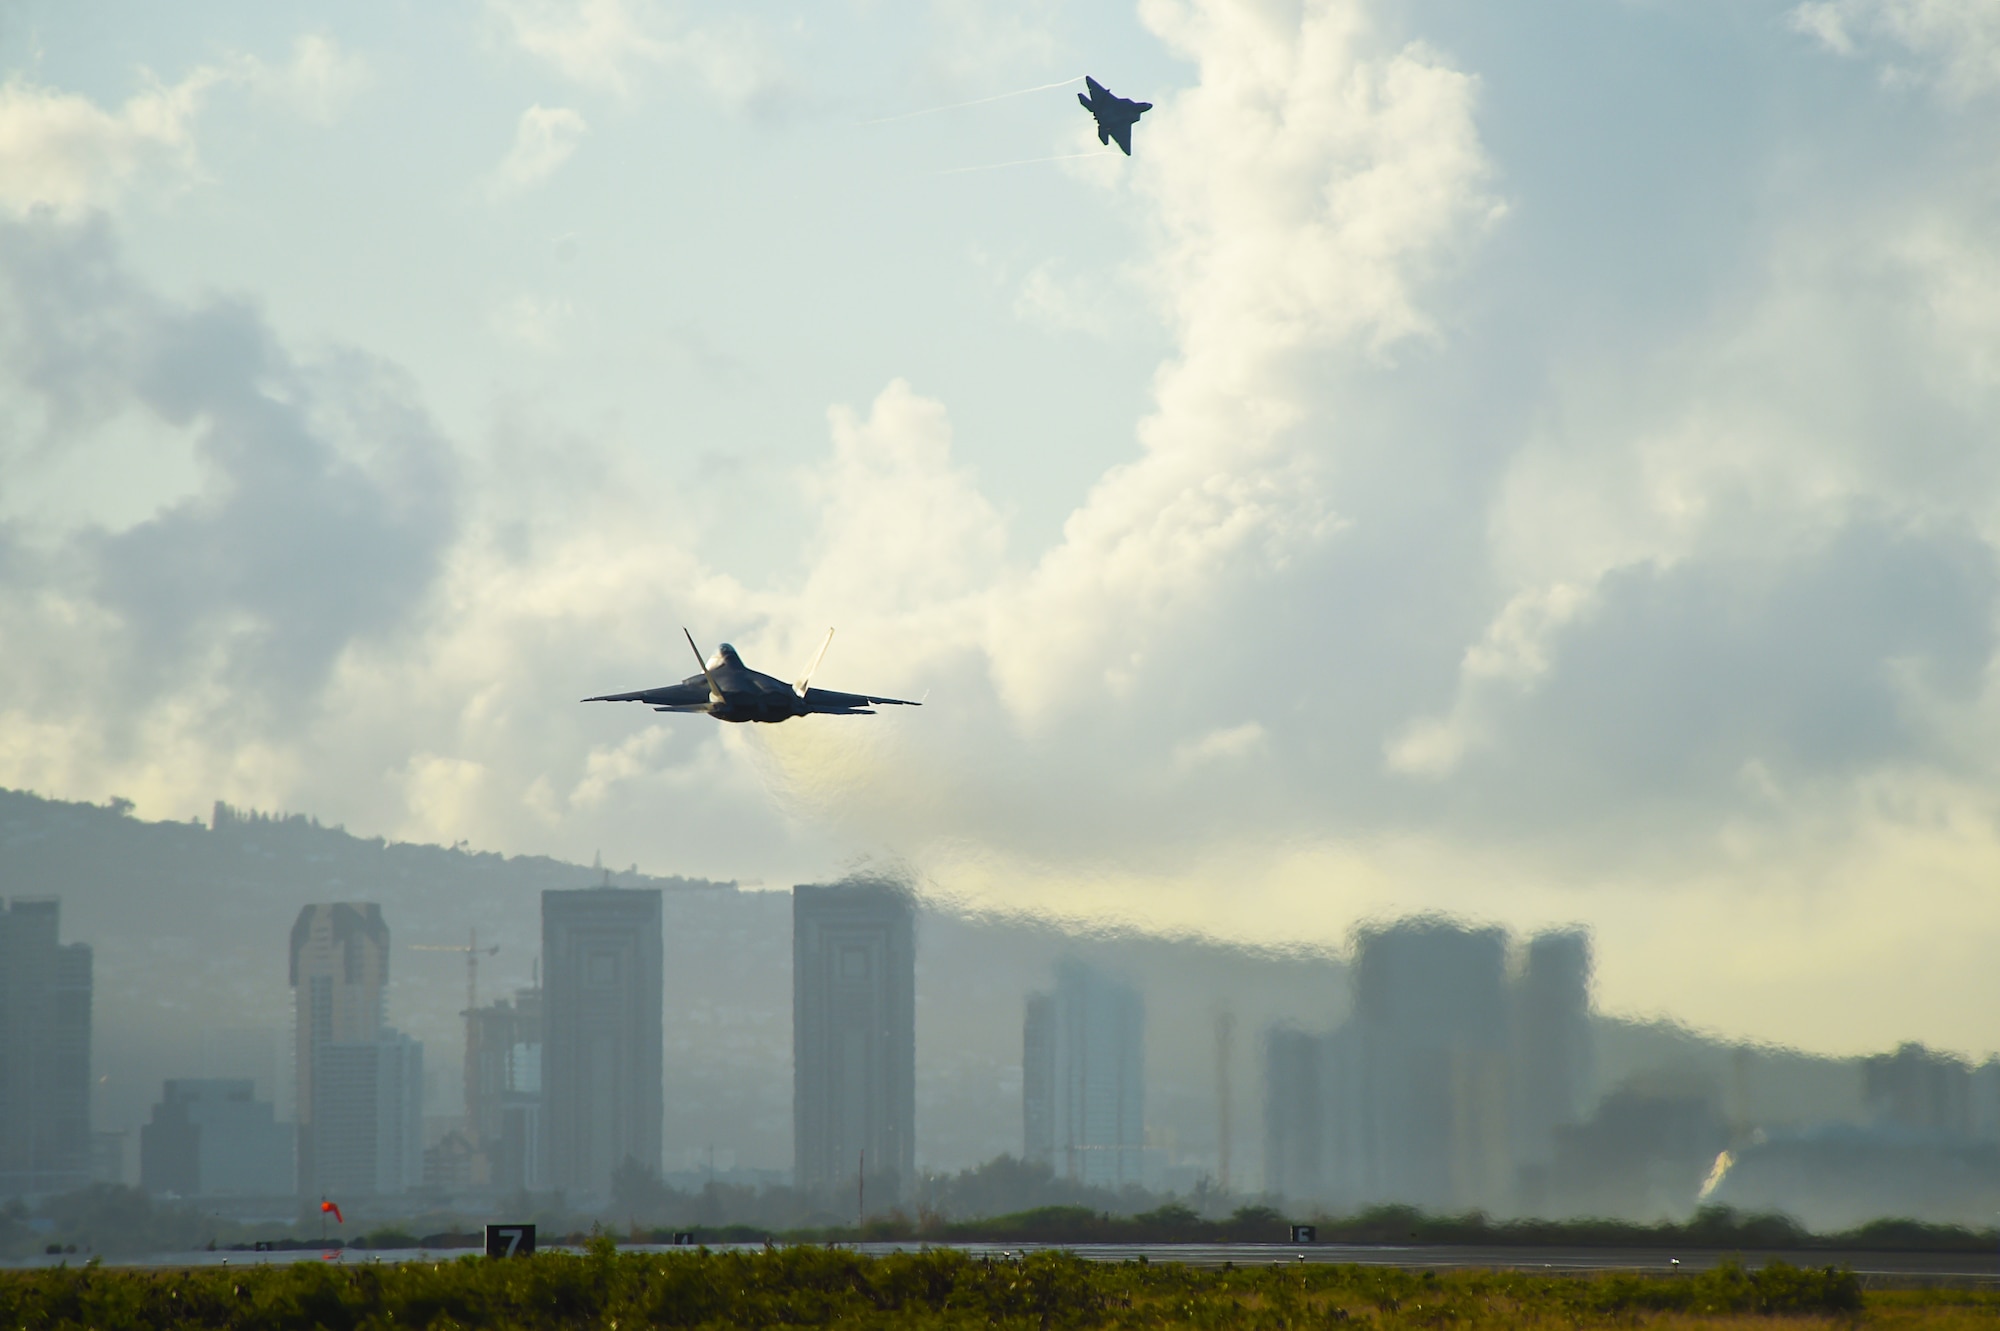 Two F-22 Raptors take off during a sortie surge from Joint Base Pearl Harbor-Hickam, Hawaii, June 6, 2015. Pilots of the F-22 from the Hawaii Air National Guard’s 199th Fighter Squadron and the 19th Fighter Squadron teamed up with maintenance Airmen from the 154th Wing and 15th Maintenance Group to launch and recover 62 Raptors in a day. The increase in sorties tested the flying capability of the total force integration squadron known as the Hawaiian Raptors. (U.S. Air Force photo by Tech. Sgt. Aaron Oelrich/Released)   